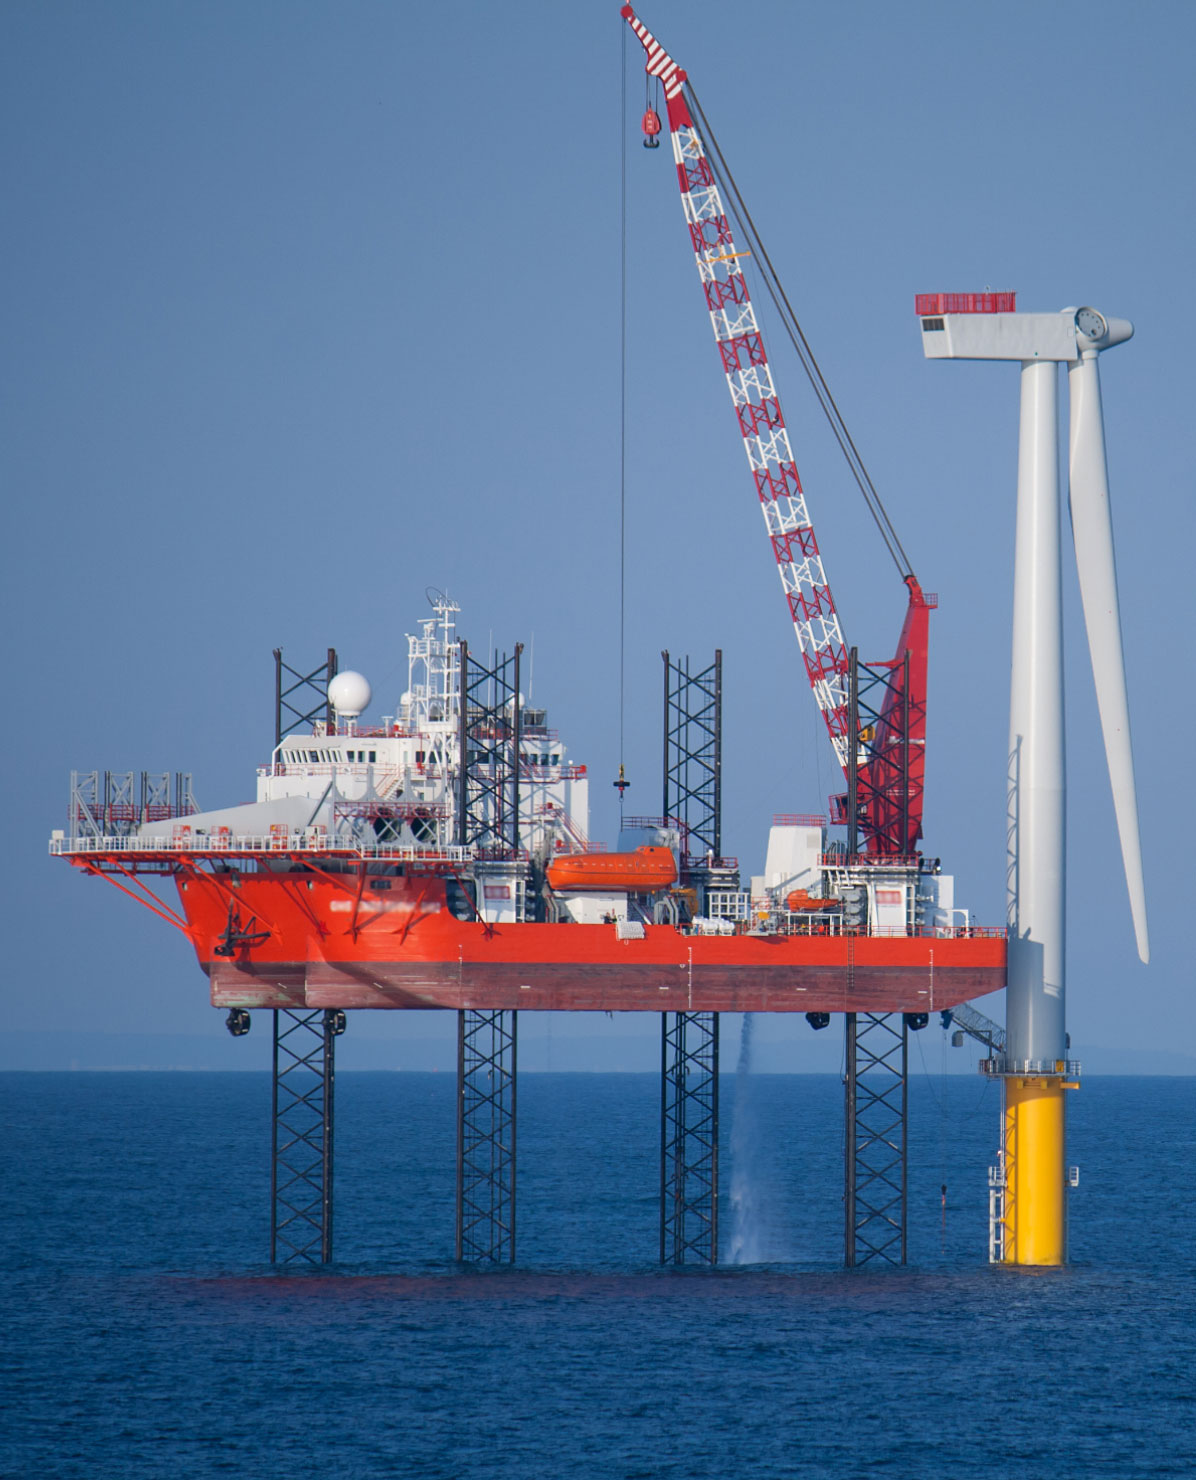 Working rig next to a wind turbine in the ocean.